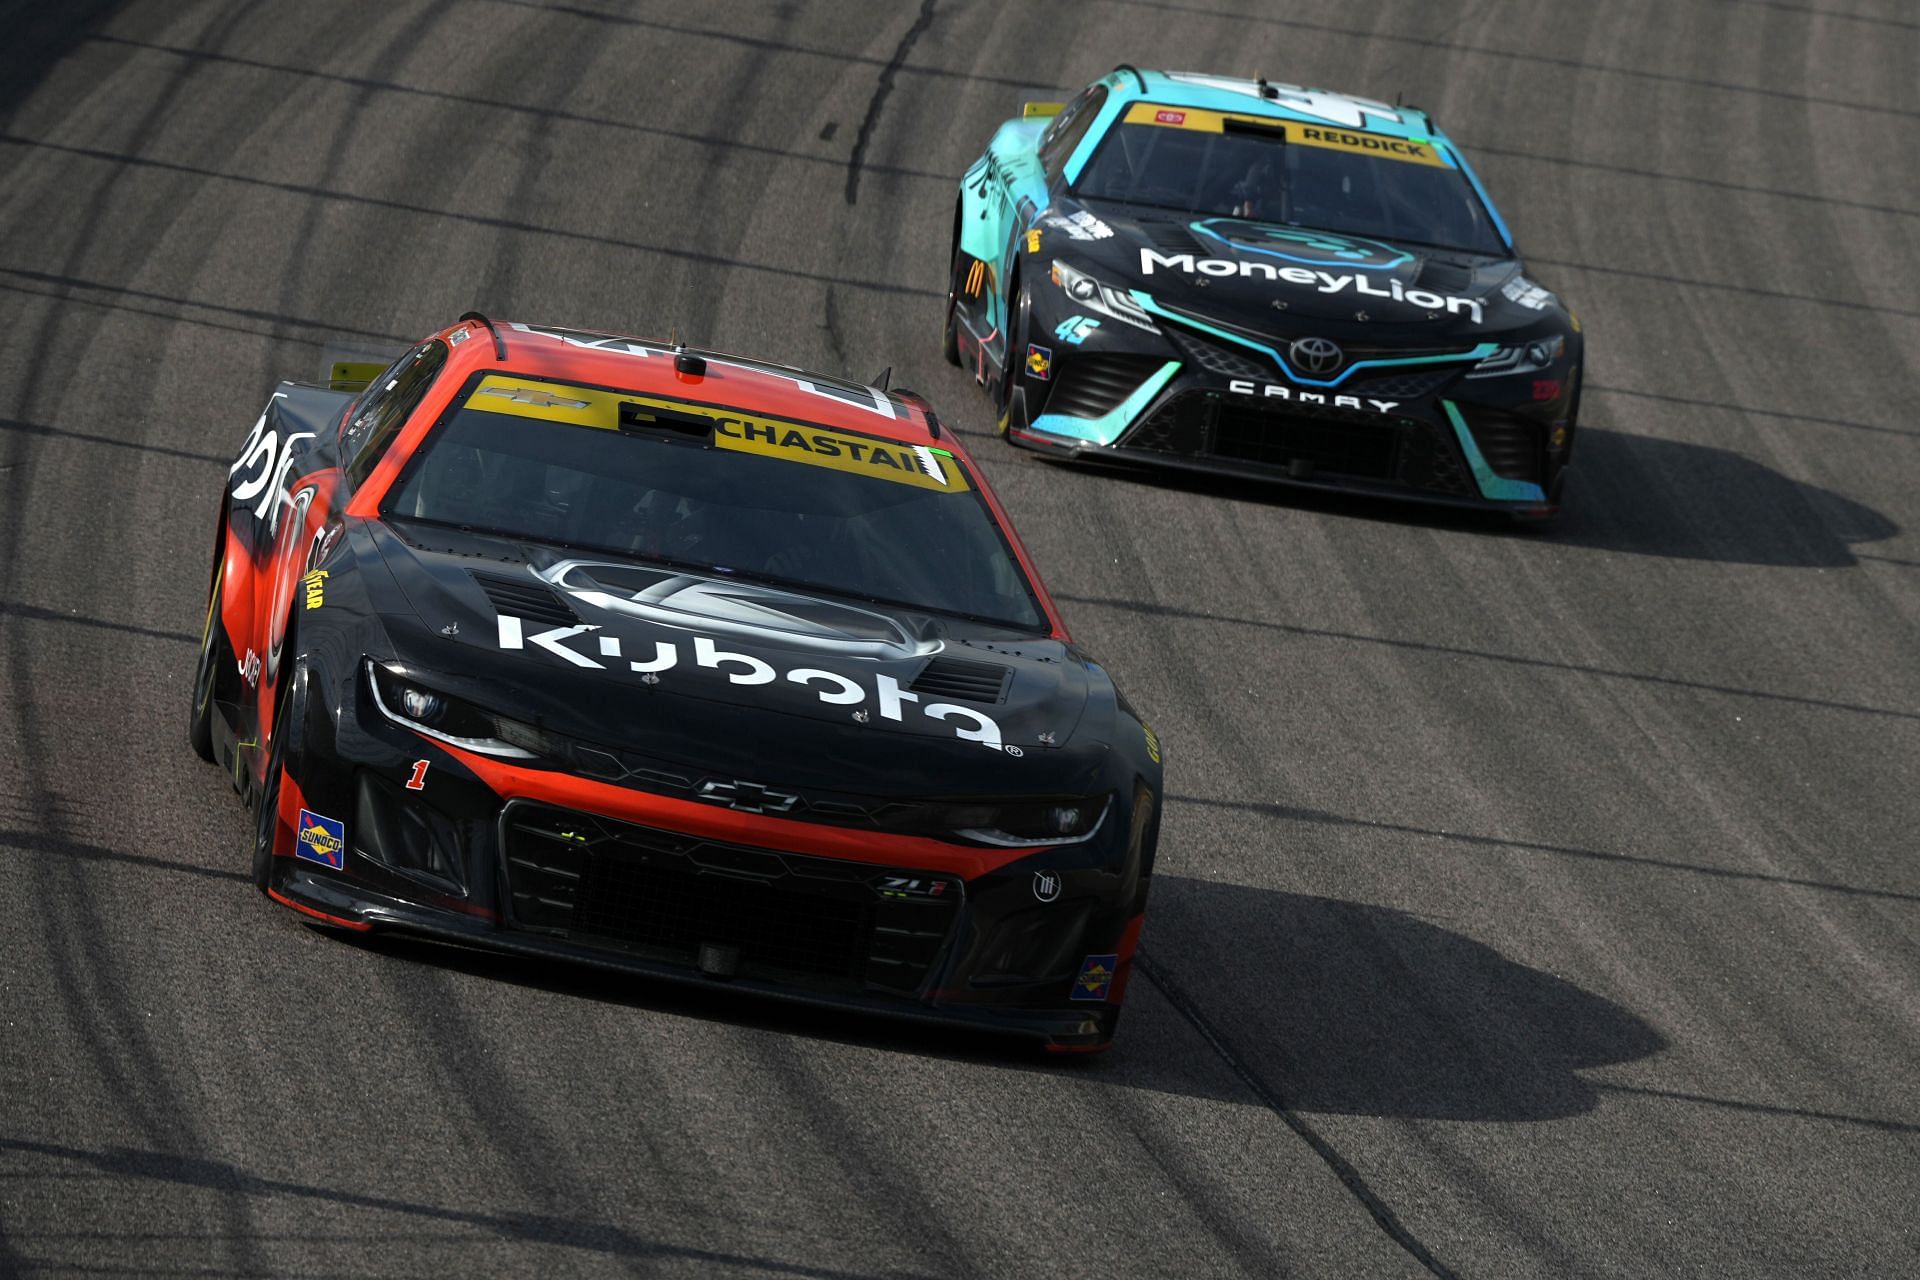 Kubota has decided to extend its sponsorship of Trackhouse Racing NASCAR cars until the end of the 2025 season.